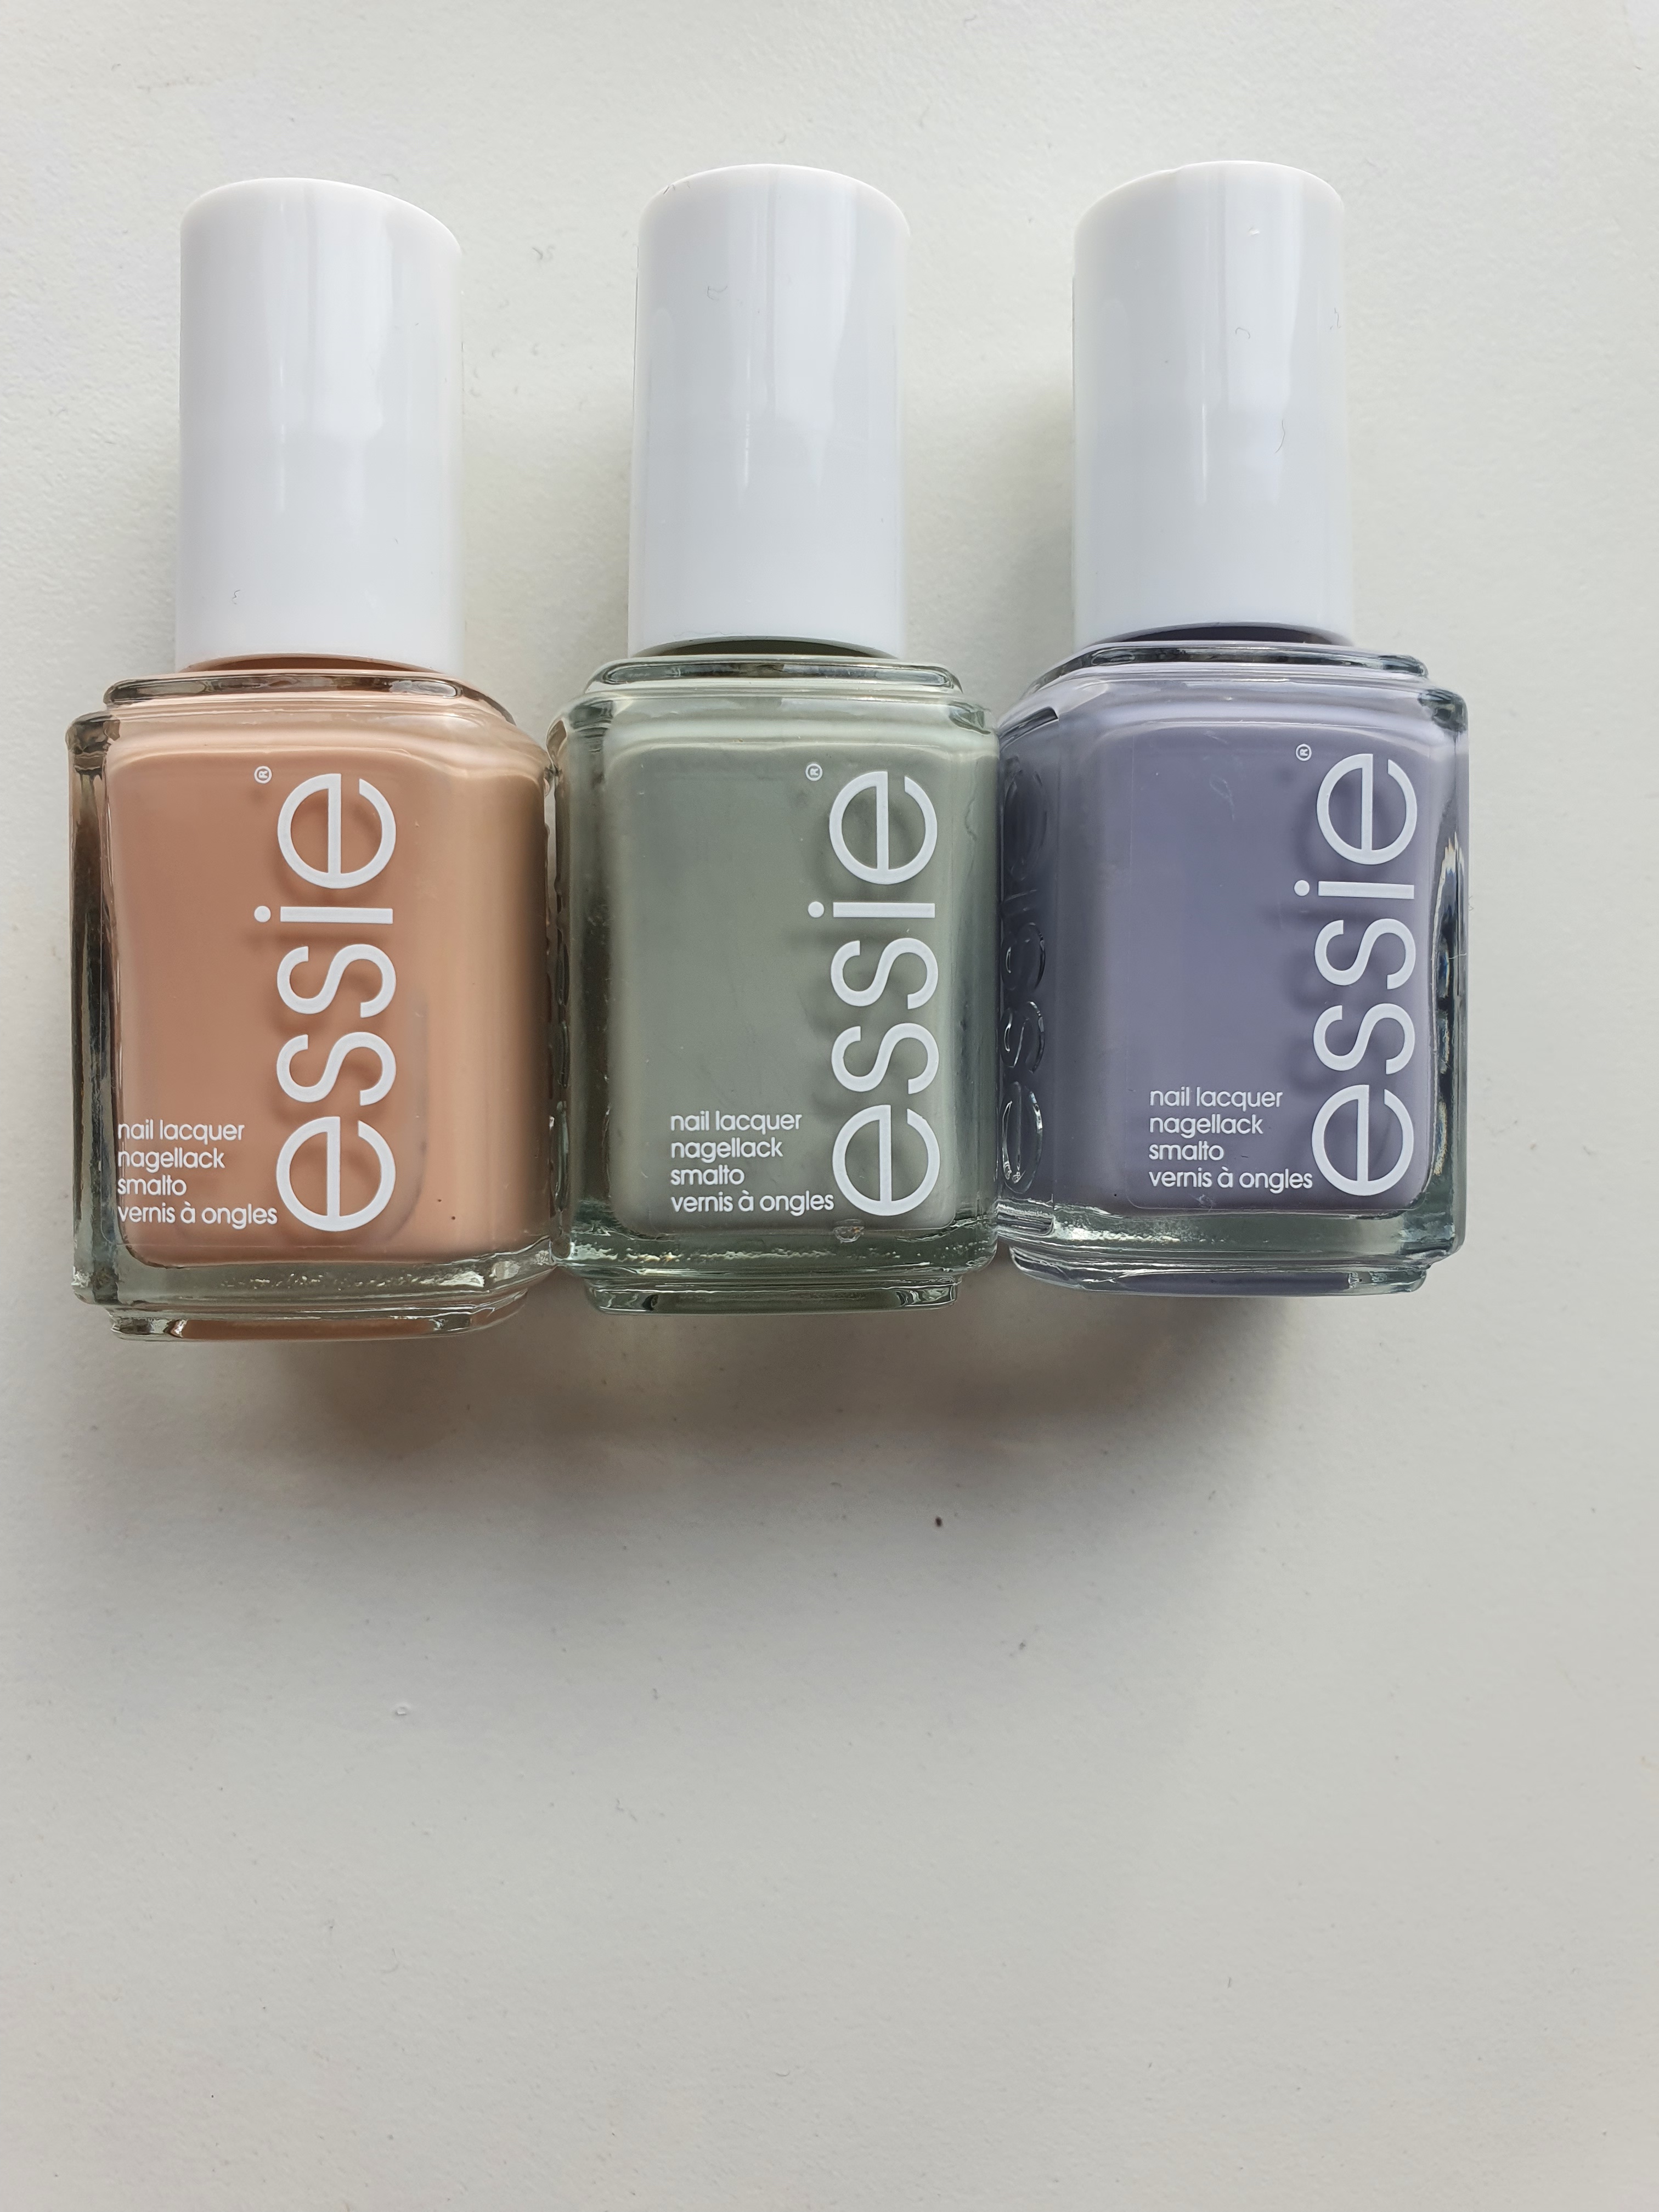 Review: Essie beleaf in yourself collection –